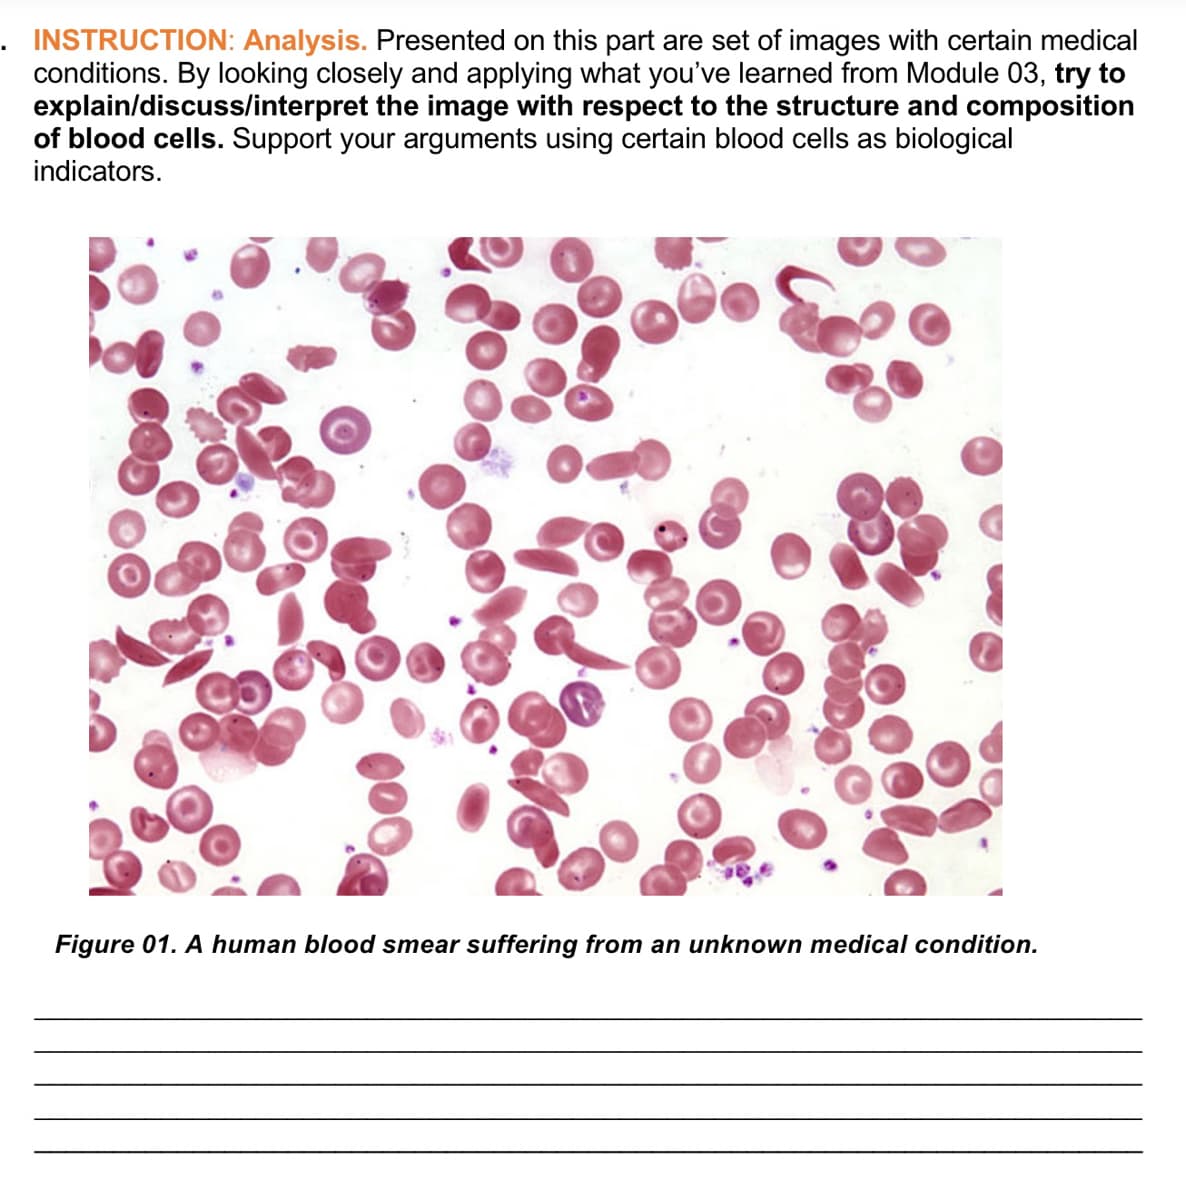 . INSTRUCTION: Analysis. Presented on this part are set of images with certain medical
conditions. By looking closely and applying what you've learned from Module 03, try to
explain/discuss/interpret the image with respect to the structure and composition
of blood cells. Support your arguments using certain blood cells as biological
indicators.
Figure 01. A human blood smear suffering from an unknown medical condition.
